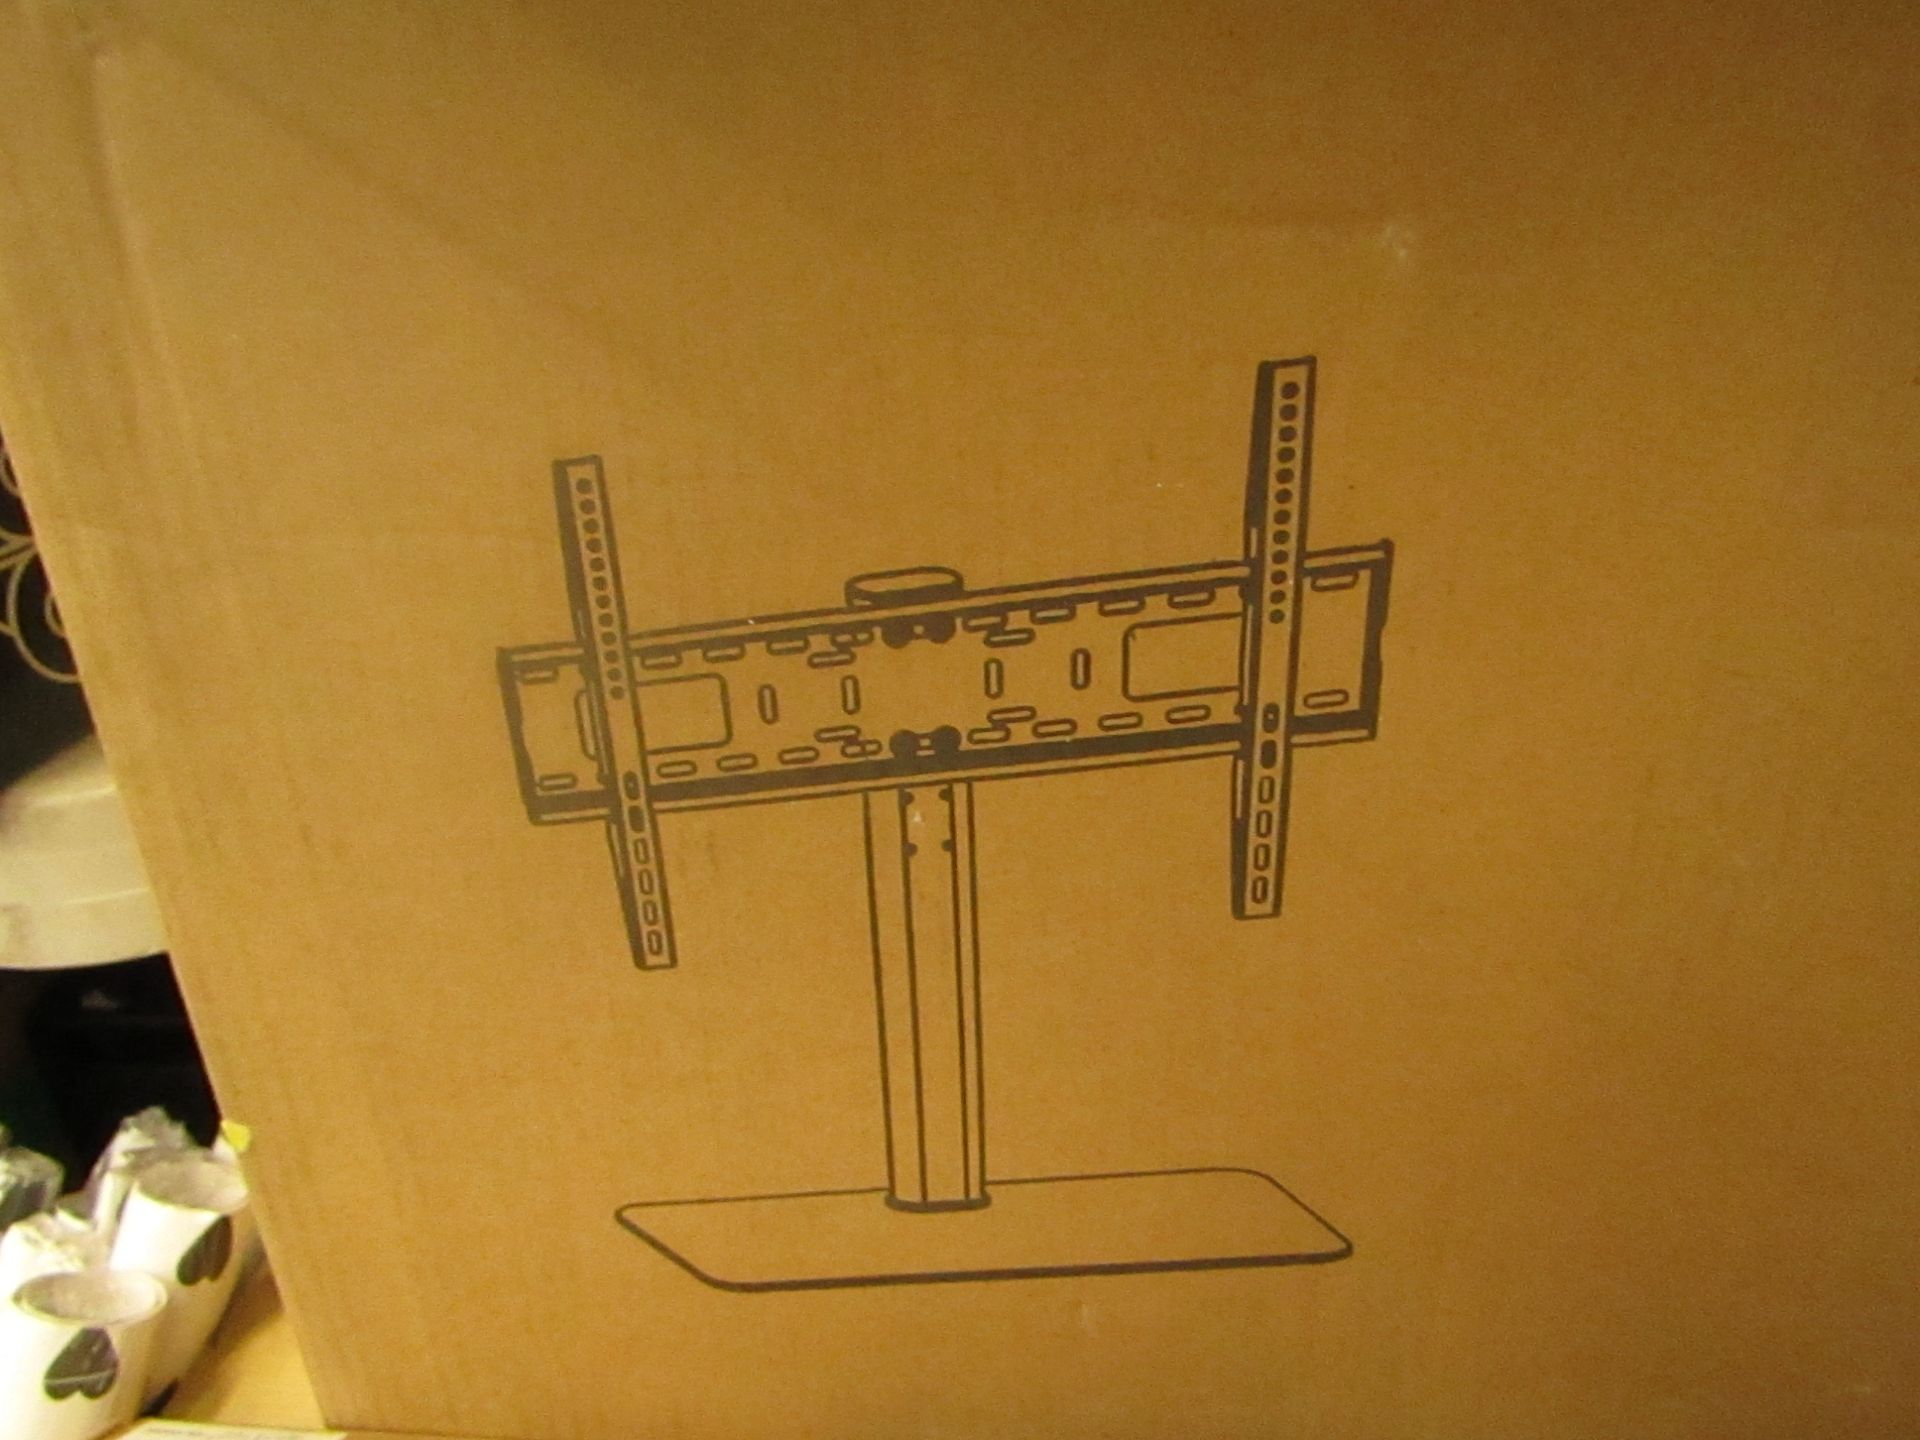 Freestanding TV bracket - unchecked and boxed.